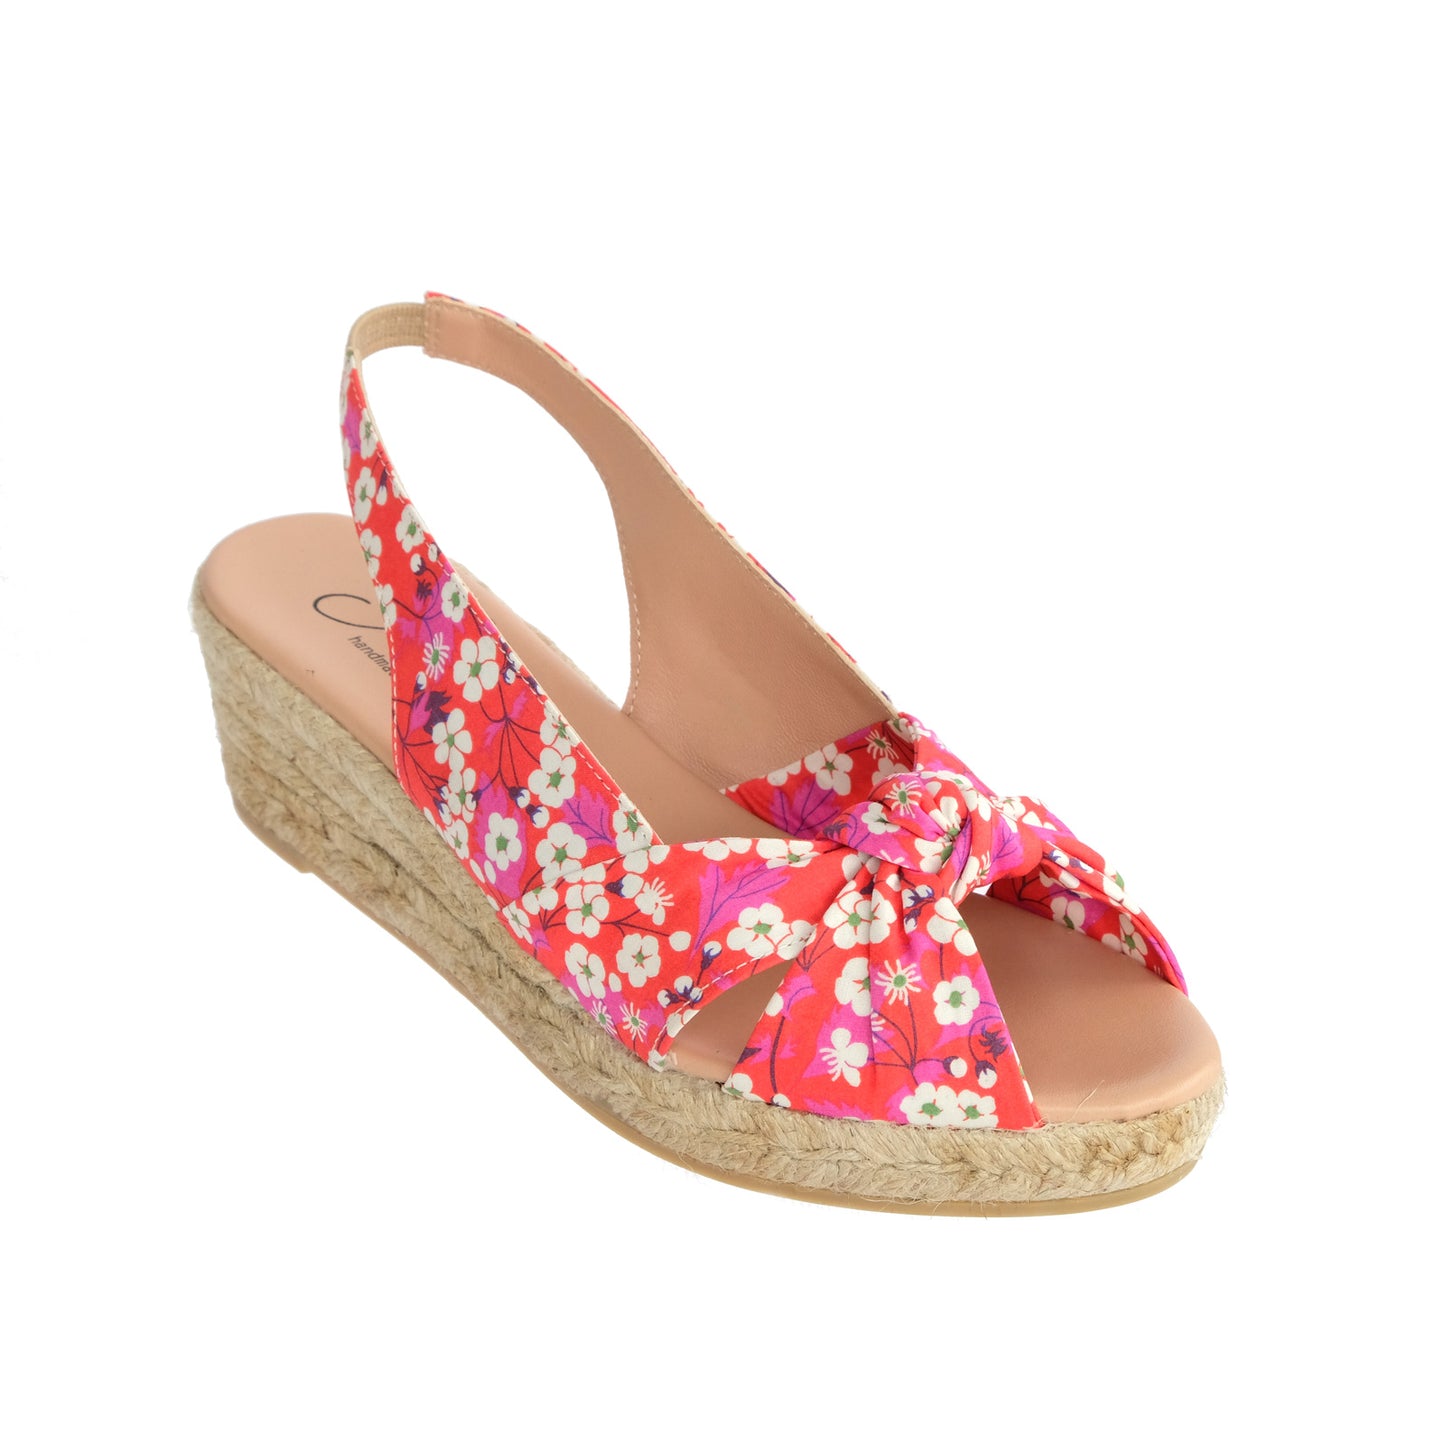 VIC LIBERTY wedges - Elizabeth Little and Badt and Co. Limited  Collection - Badt and Co